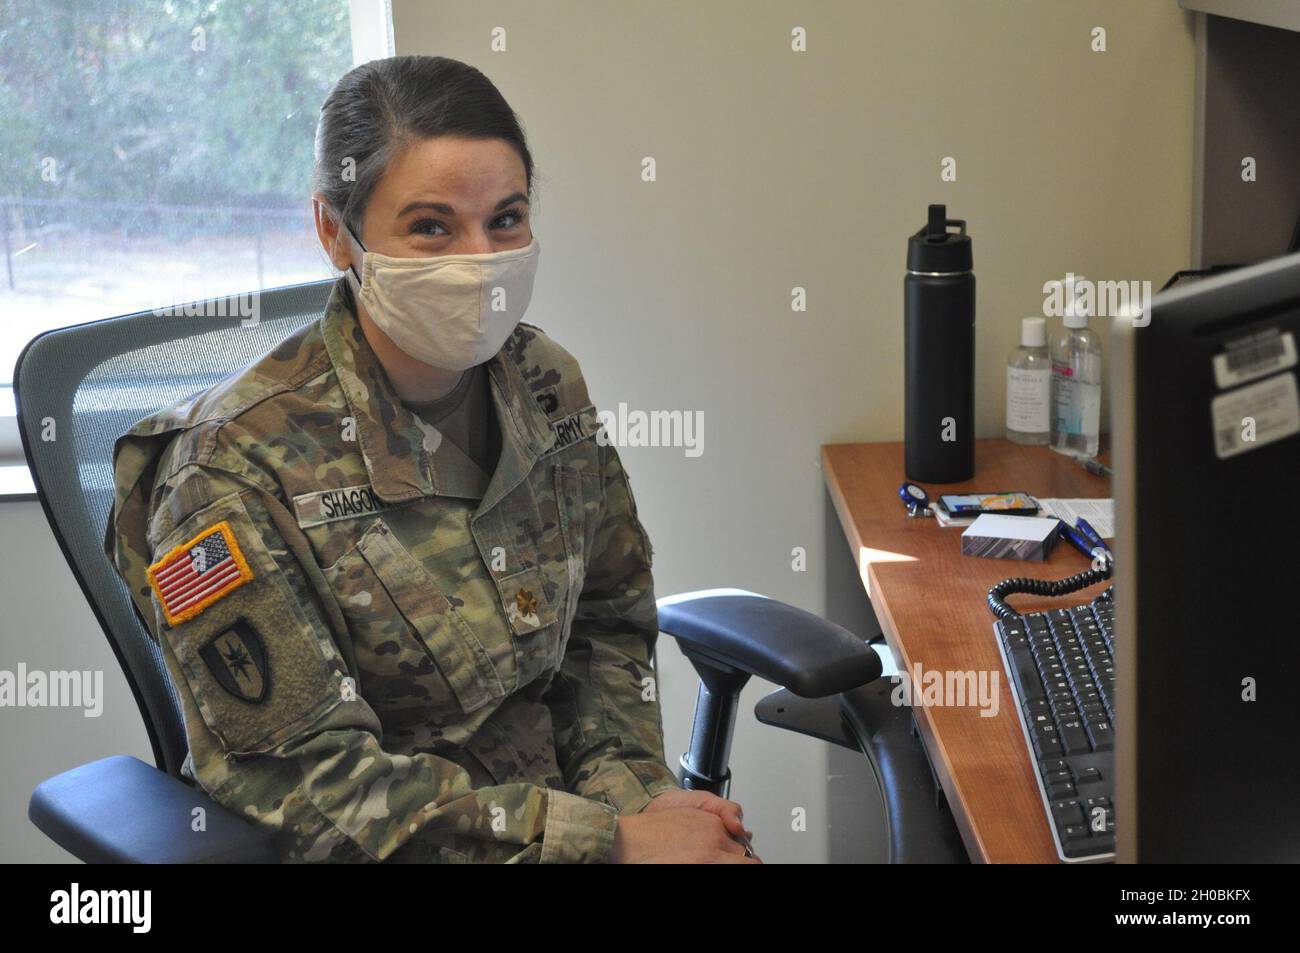 Public Health Nurse Maj. Ariel Shagory works on COVID-19 contact tracing and notification in her office in the Department of Preventive Medicine at Martin Army Community Hospital. Stock Photo